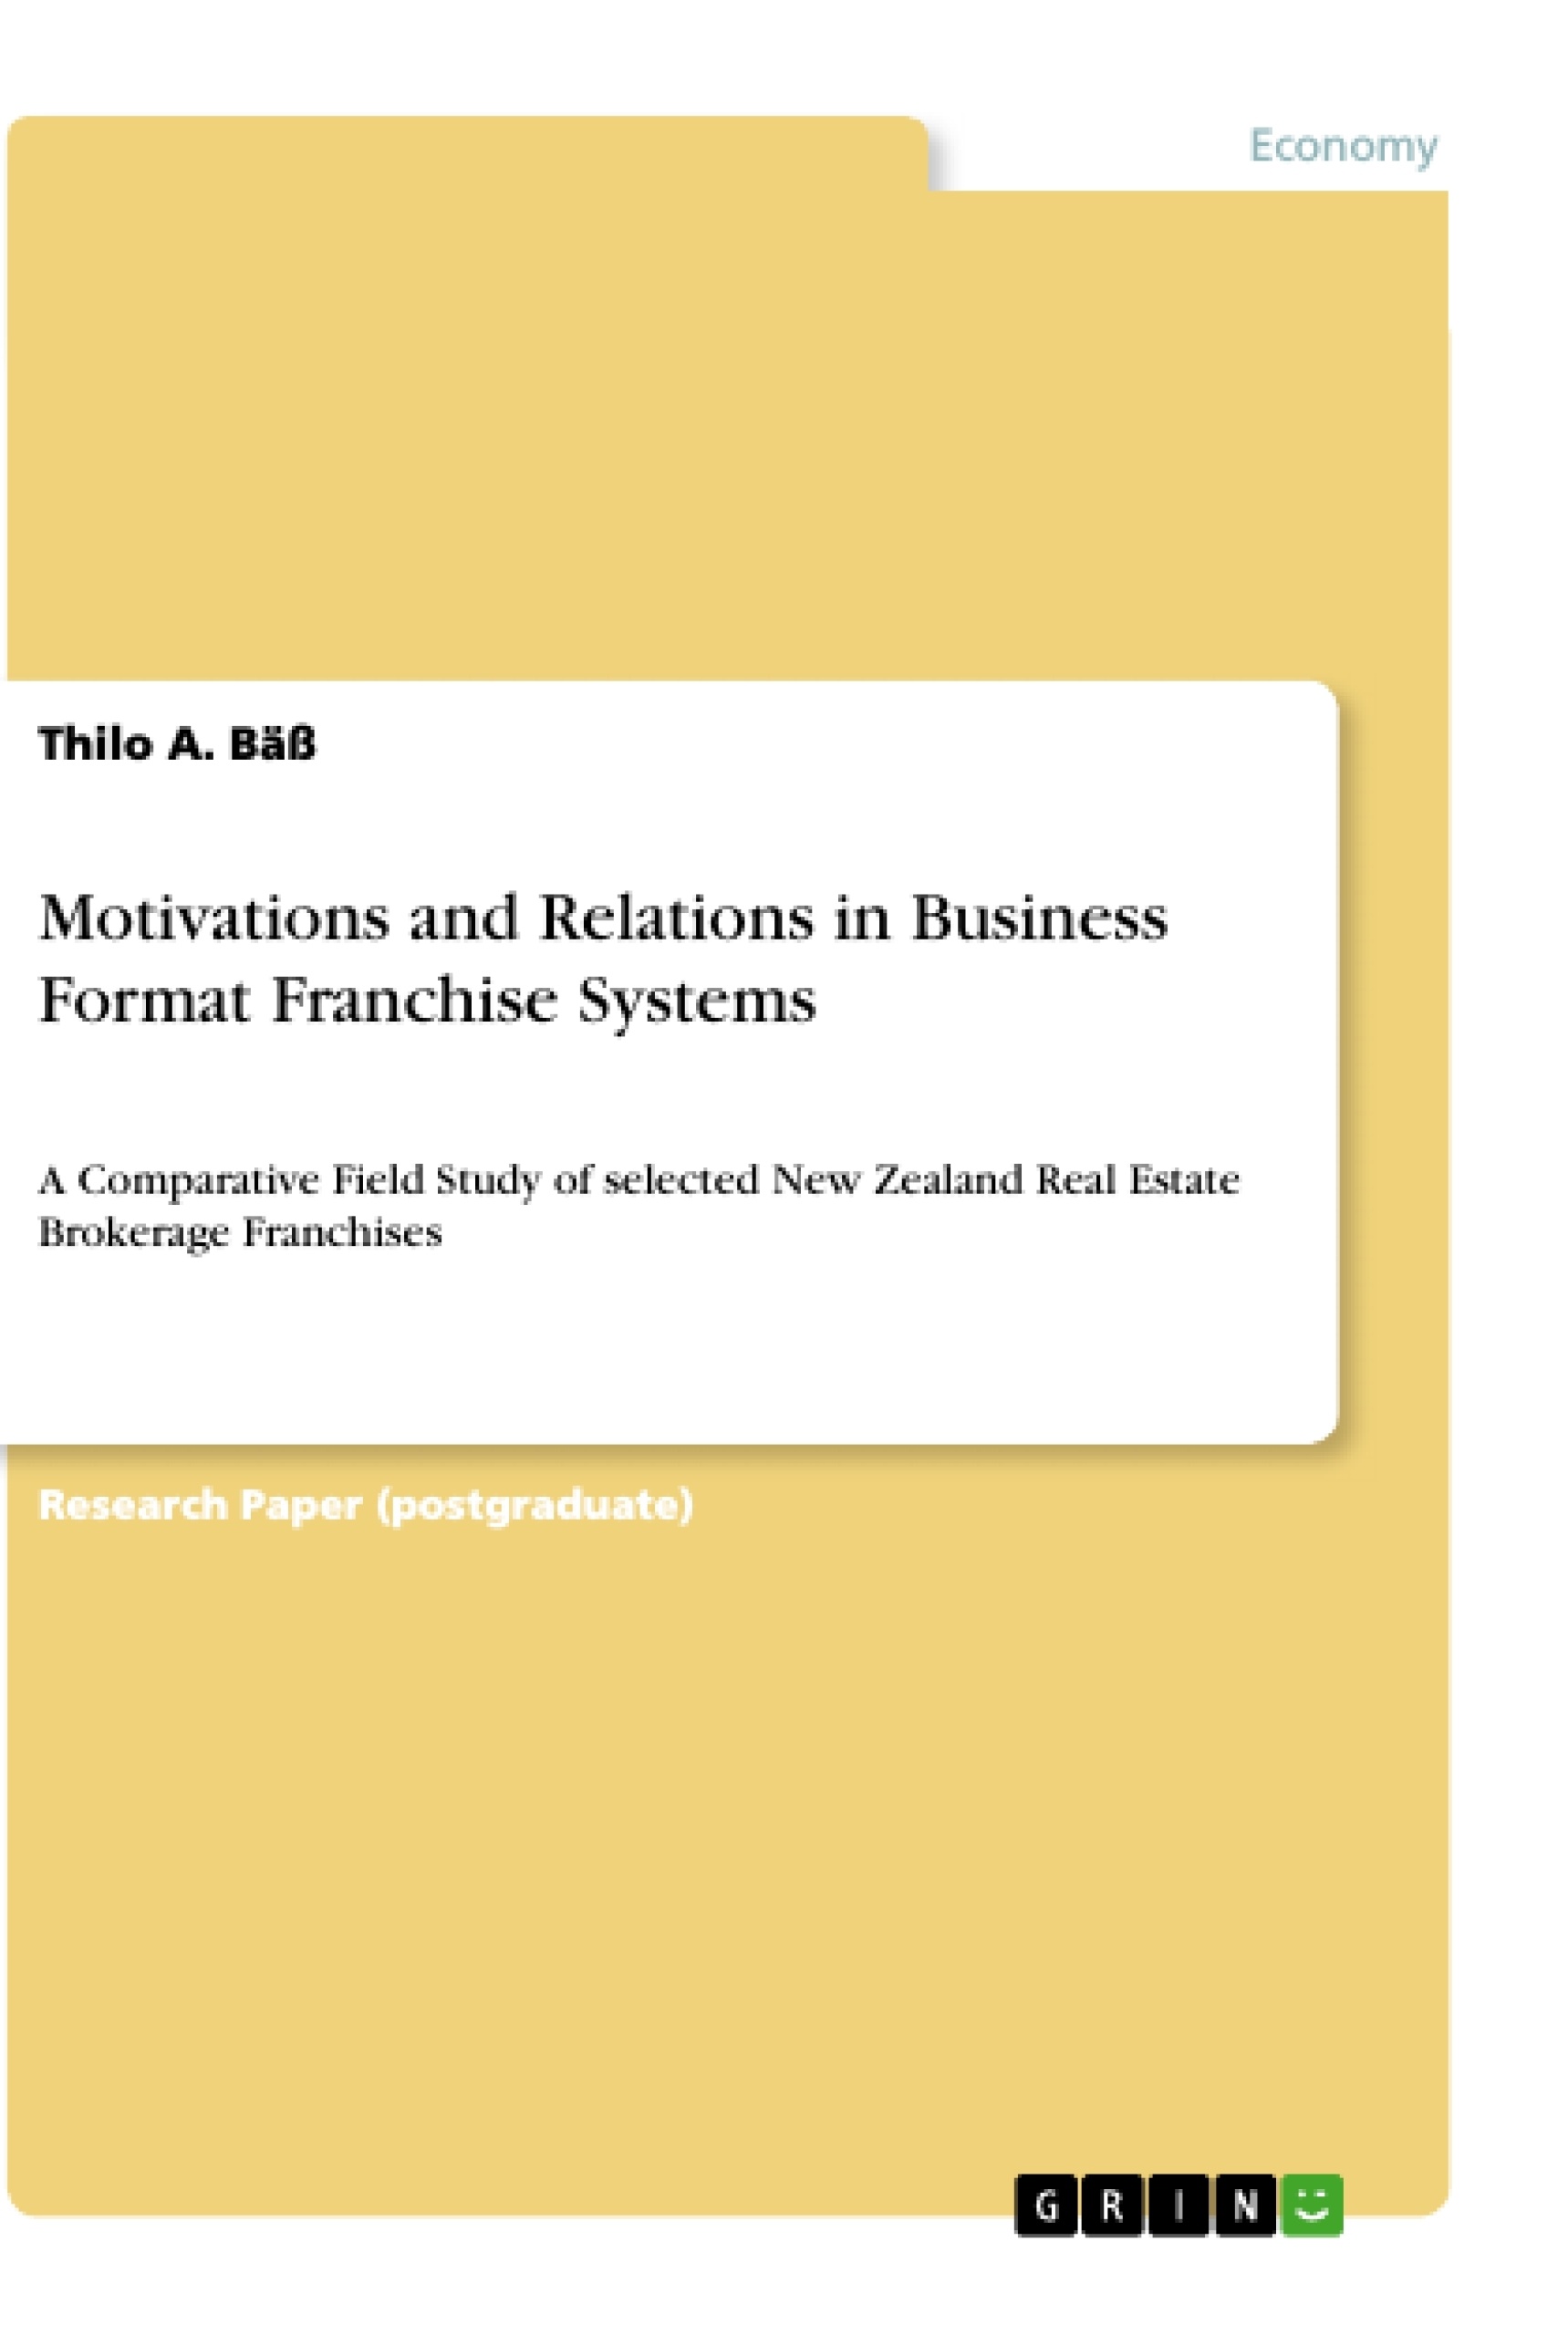 Title: Motivations and Relations in Business Format Franchise Systems